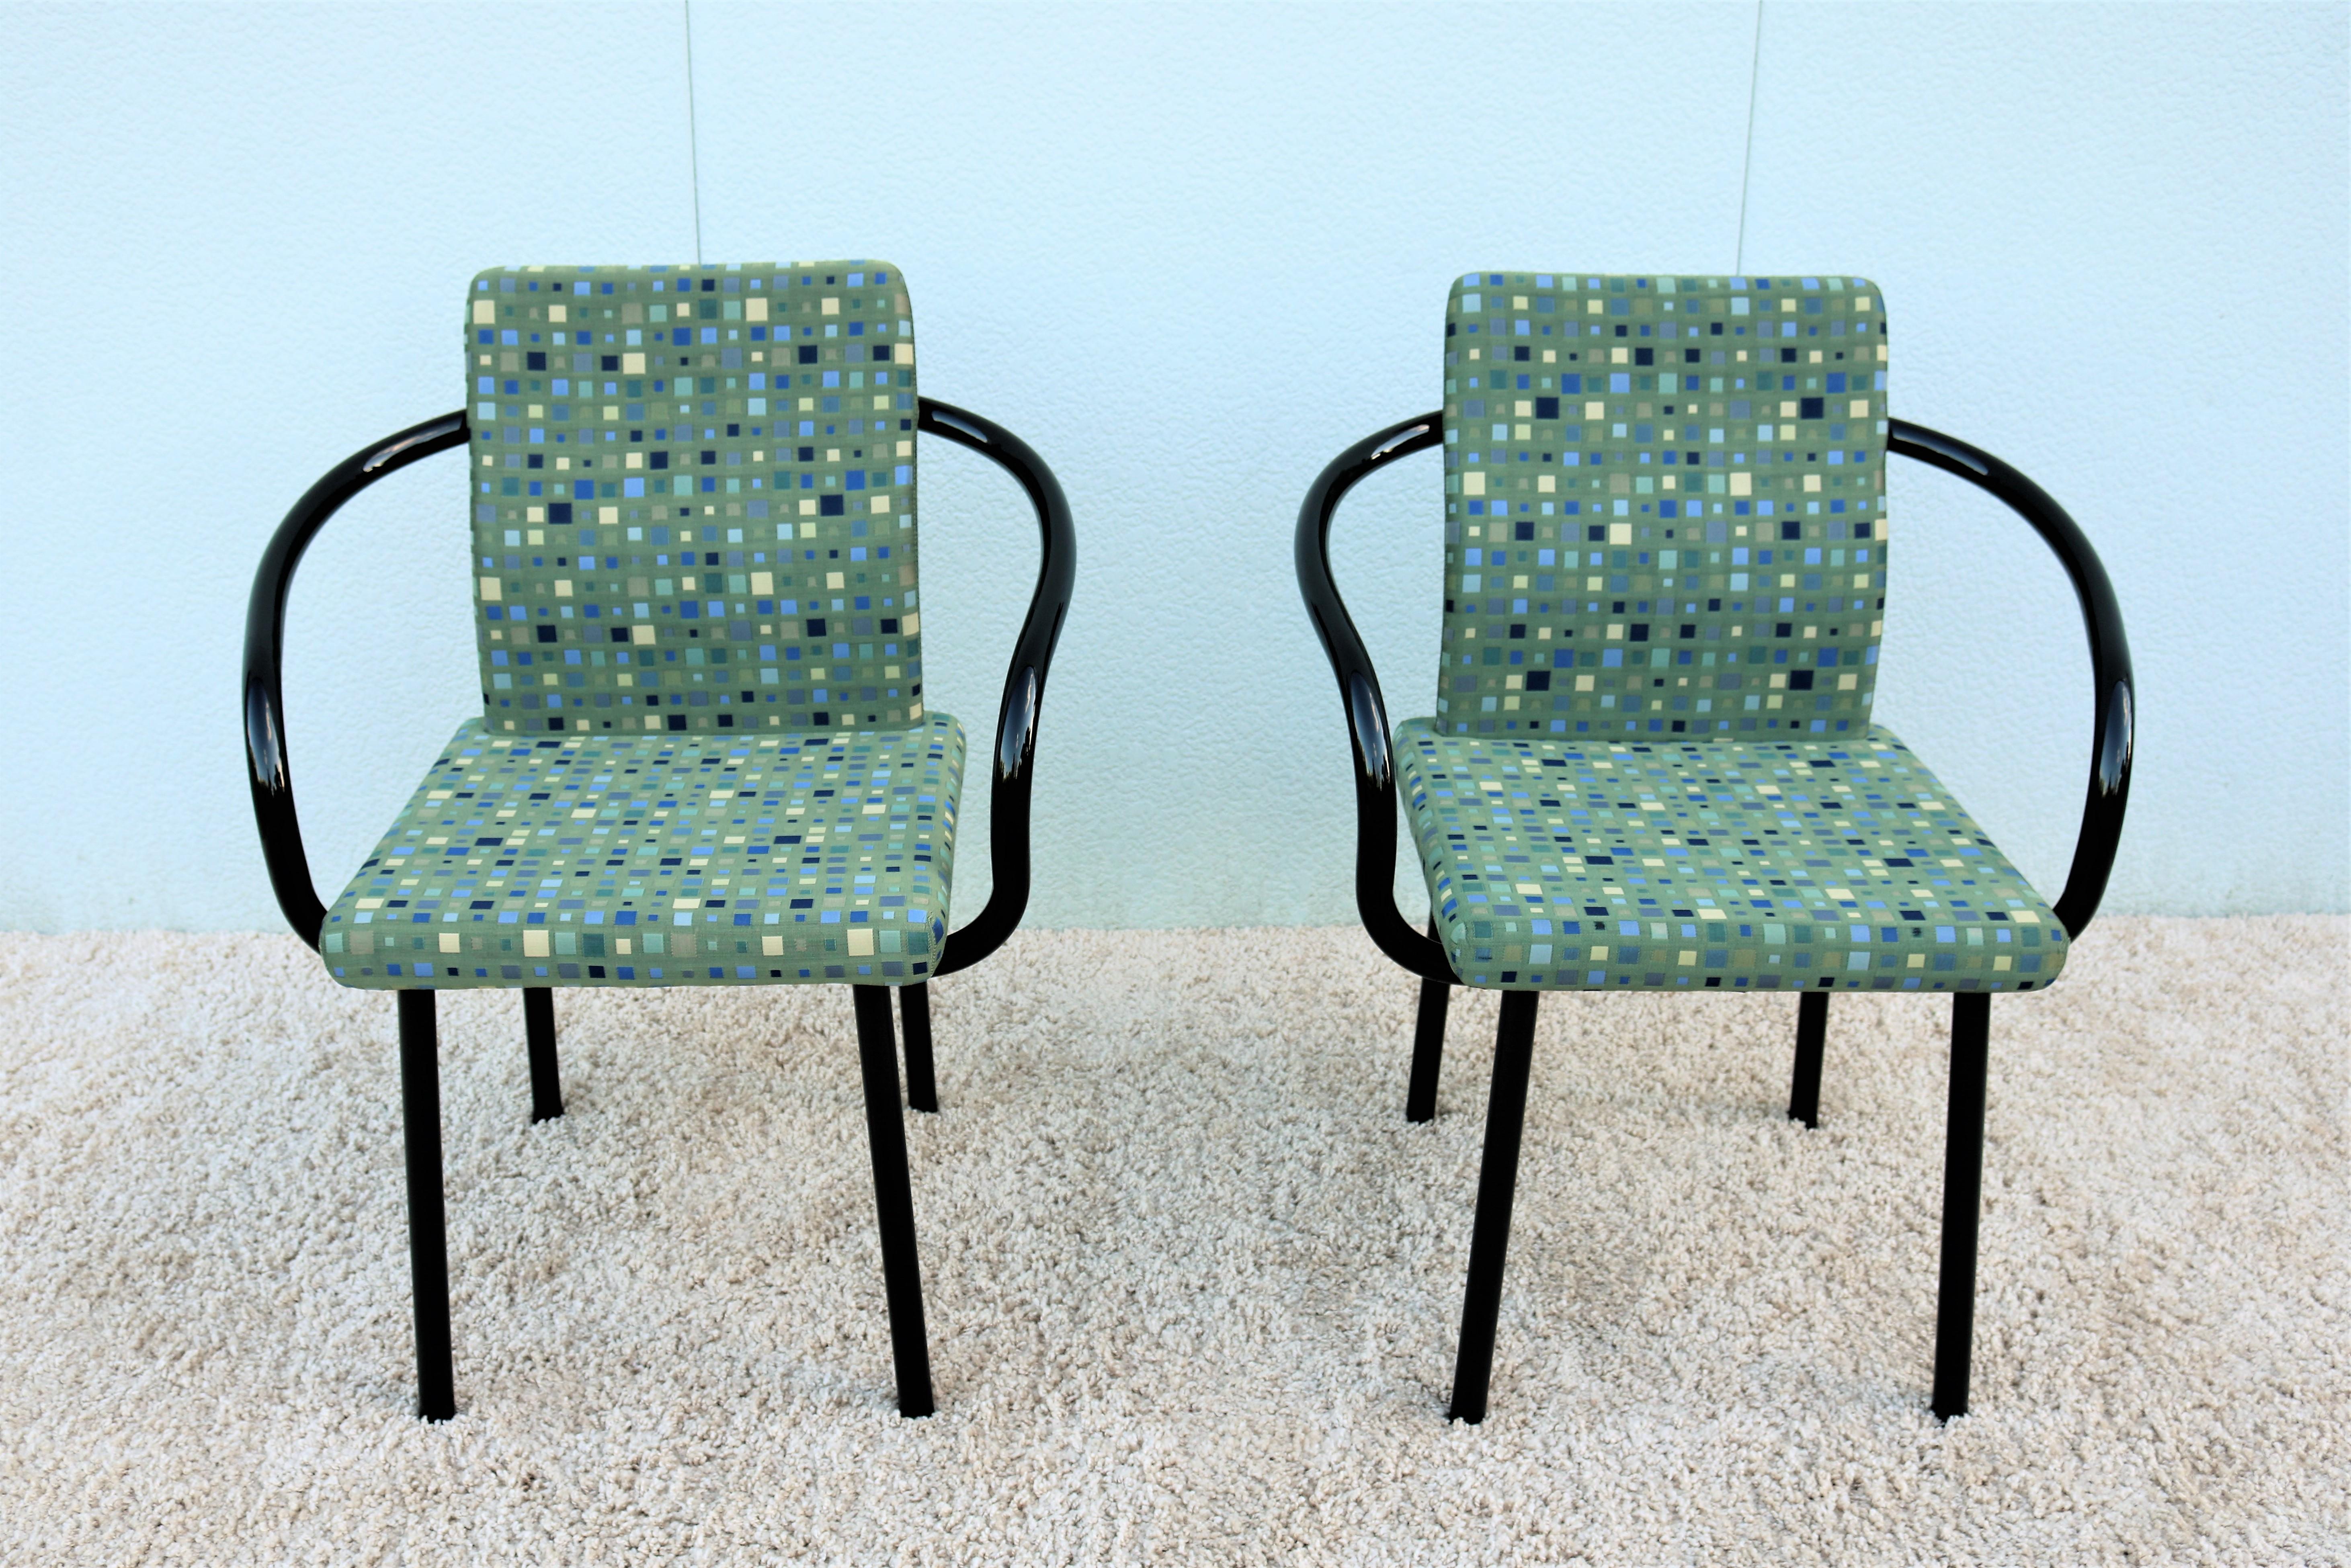 Fabulous and authentic Ettore Sottsass pair of Mandarin armchairs. The Austrian born Ettore Sottsass has been one of the leading Italian designers of the last few decades, in 1980s he become widely celebrated for his bold, colorful and flamboyantly